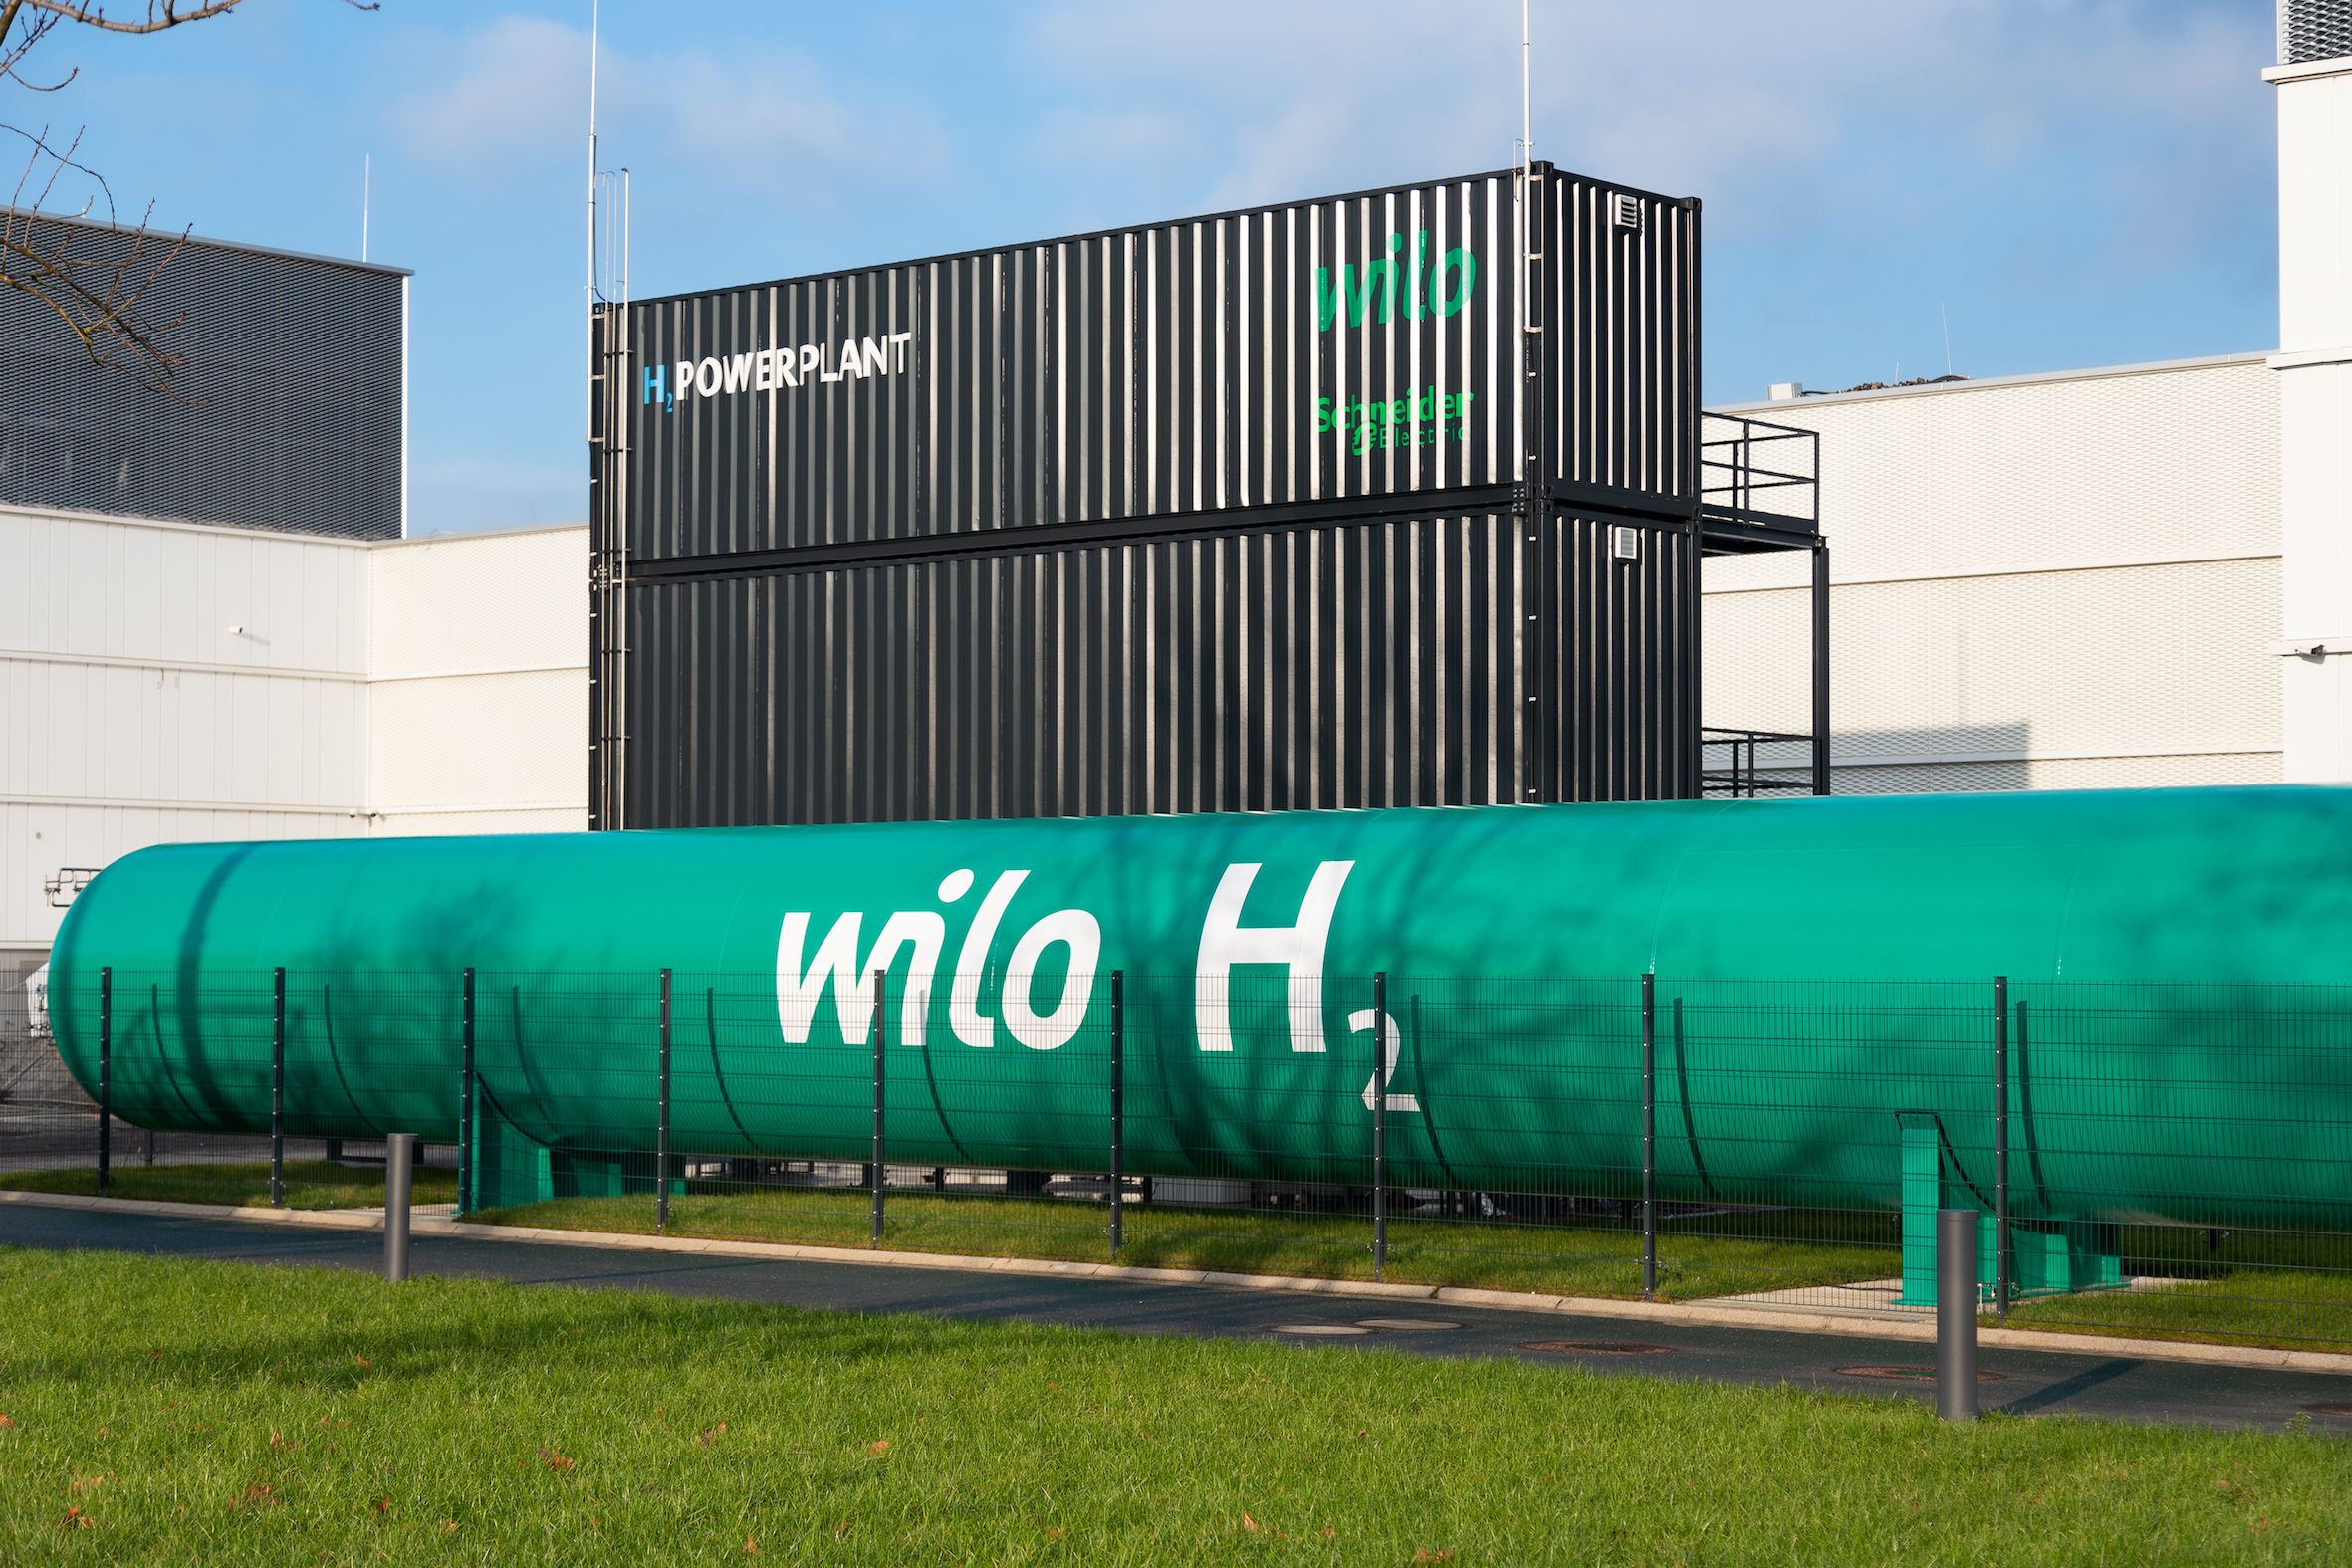 Wilo powers ahead with ‘world-first’ green hydrogen transition with H2Powerplant